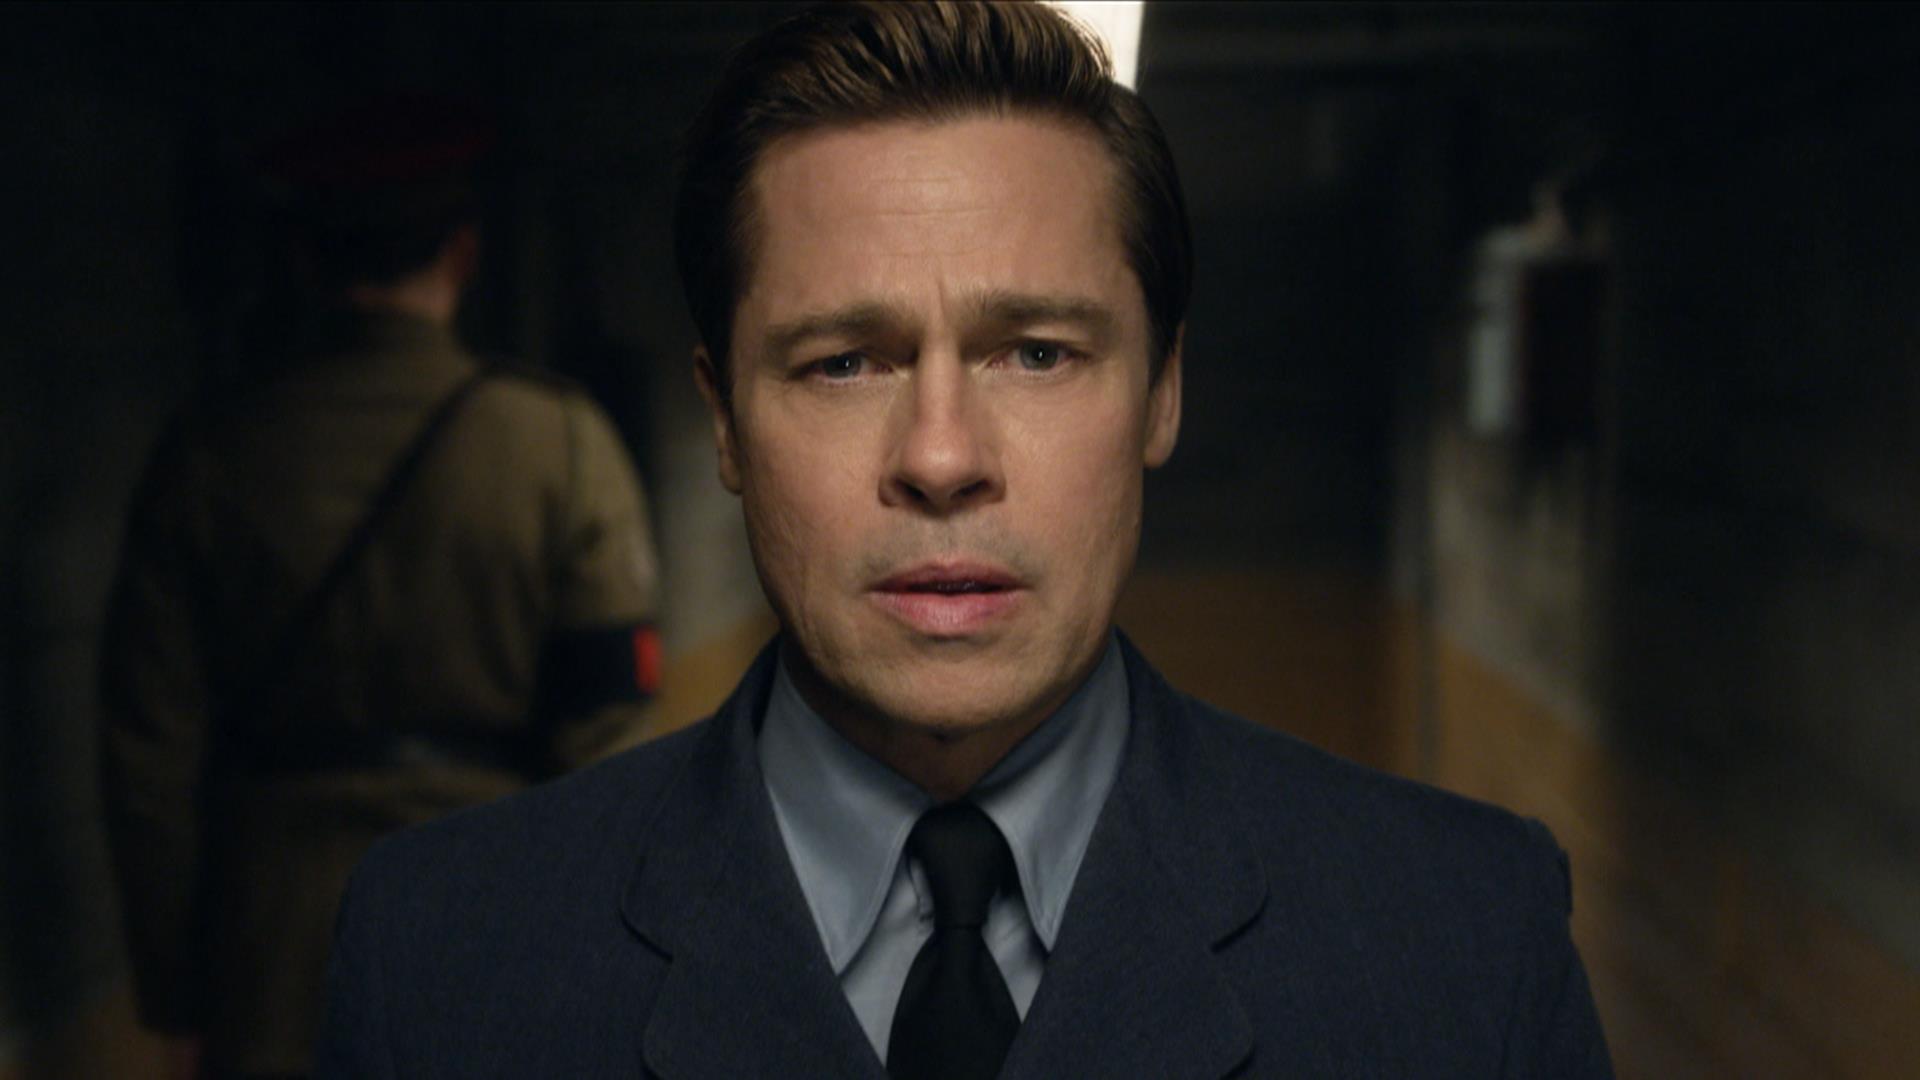 Watch Brad Pitt in exclusive first look at ‘Allied’ - TODAY.com1920 x 1080